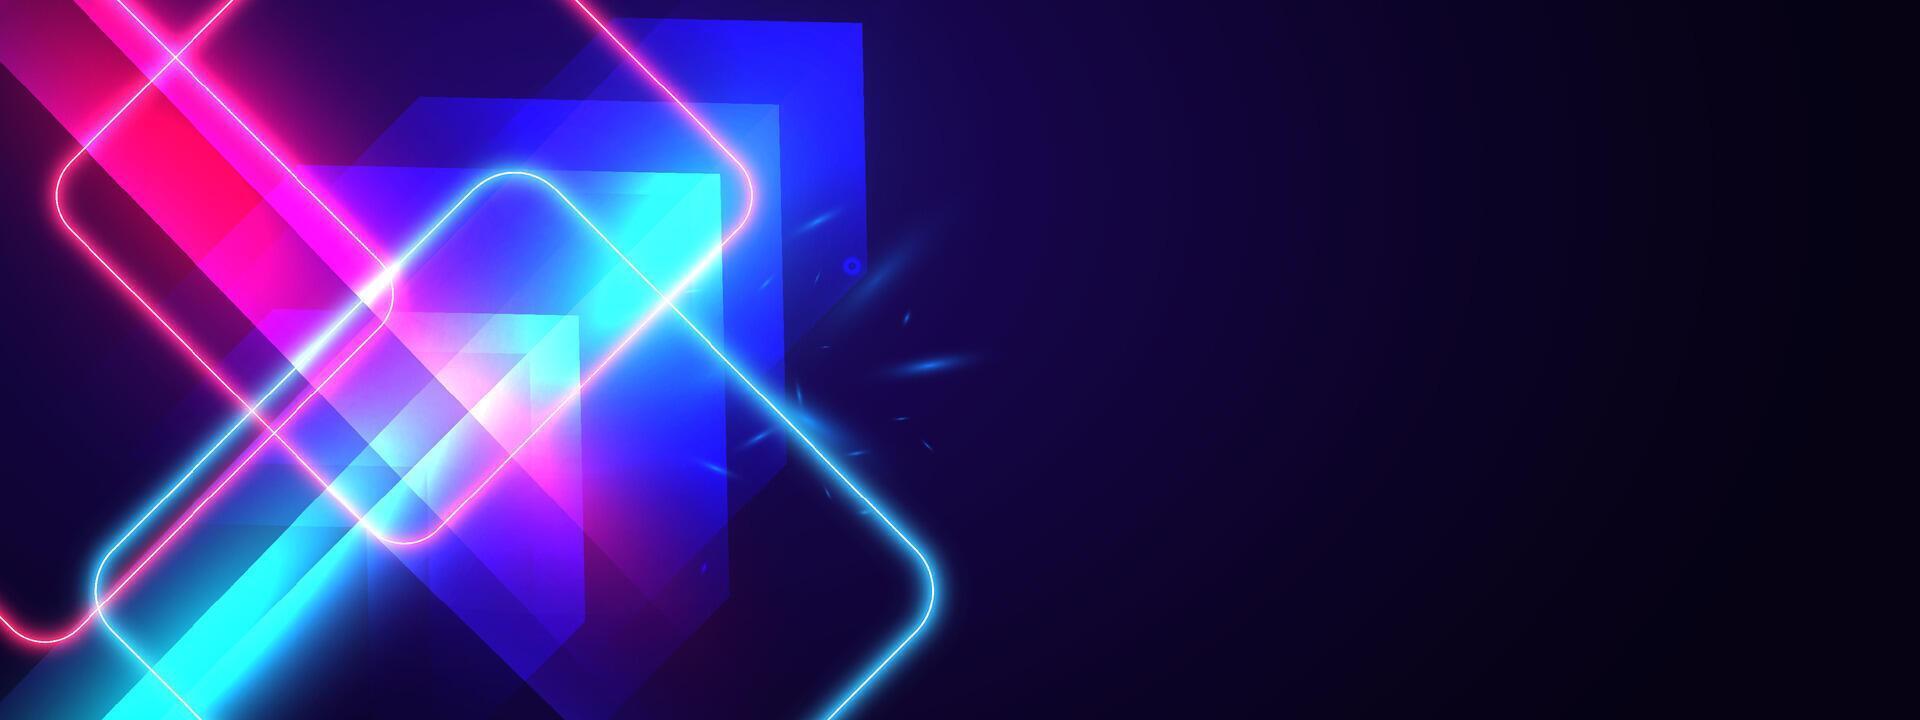 Abstract glowing neon lights background vector